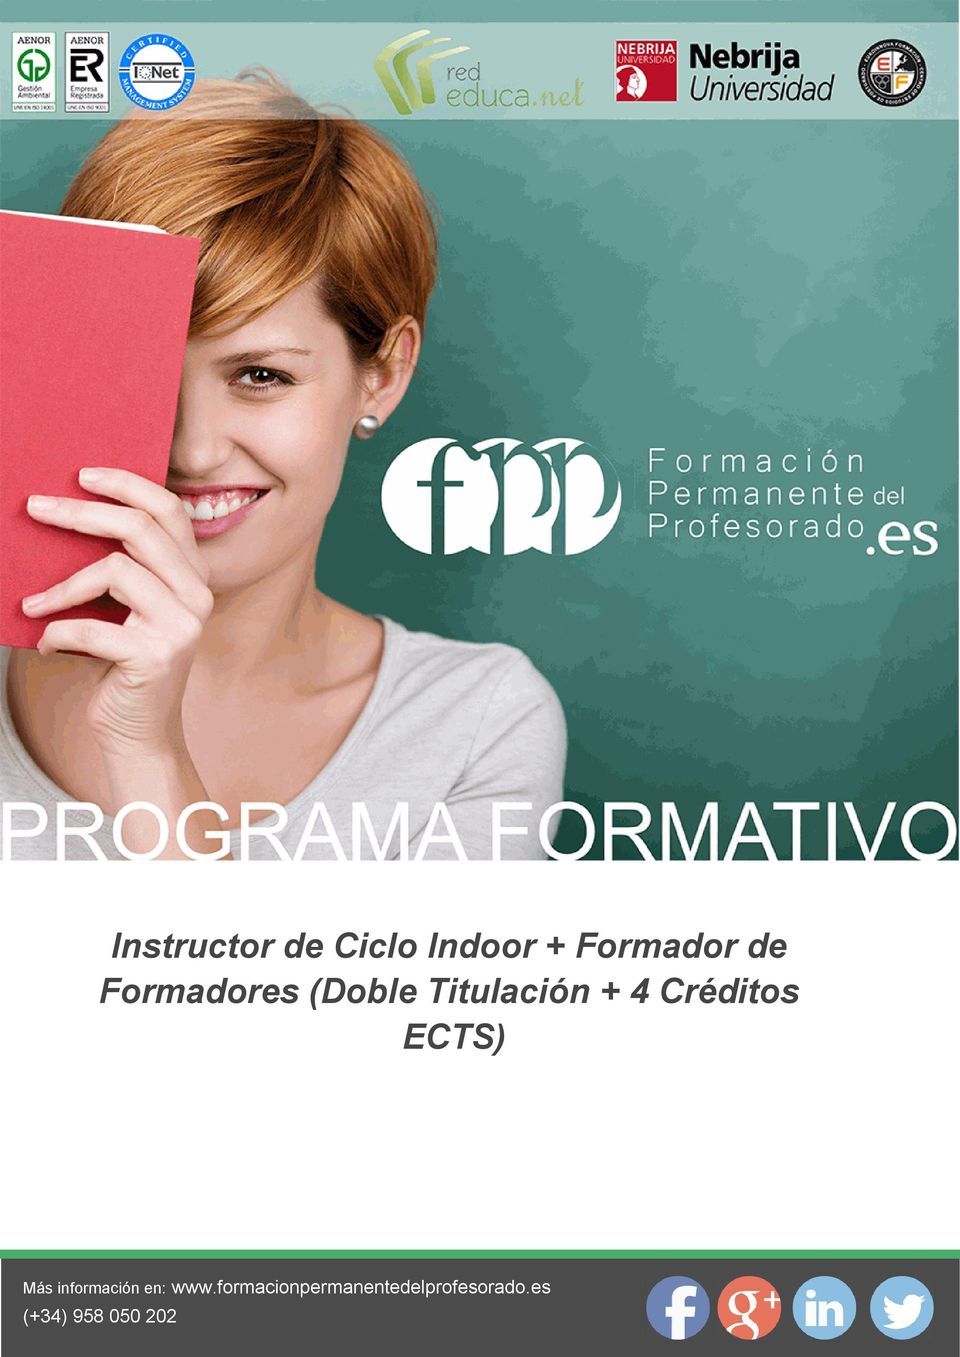 Formadores (Doble